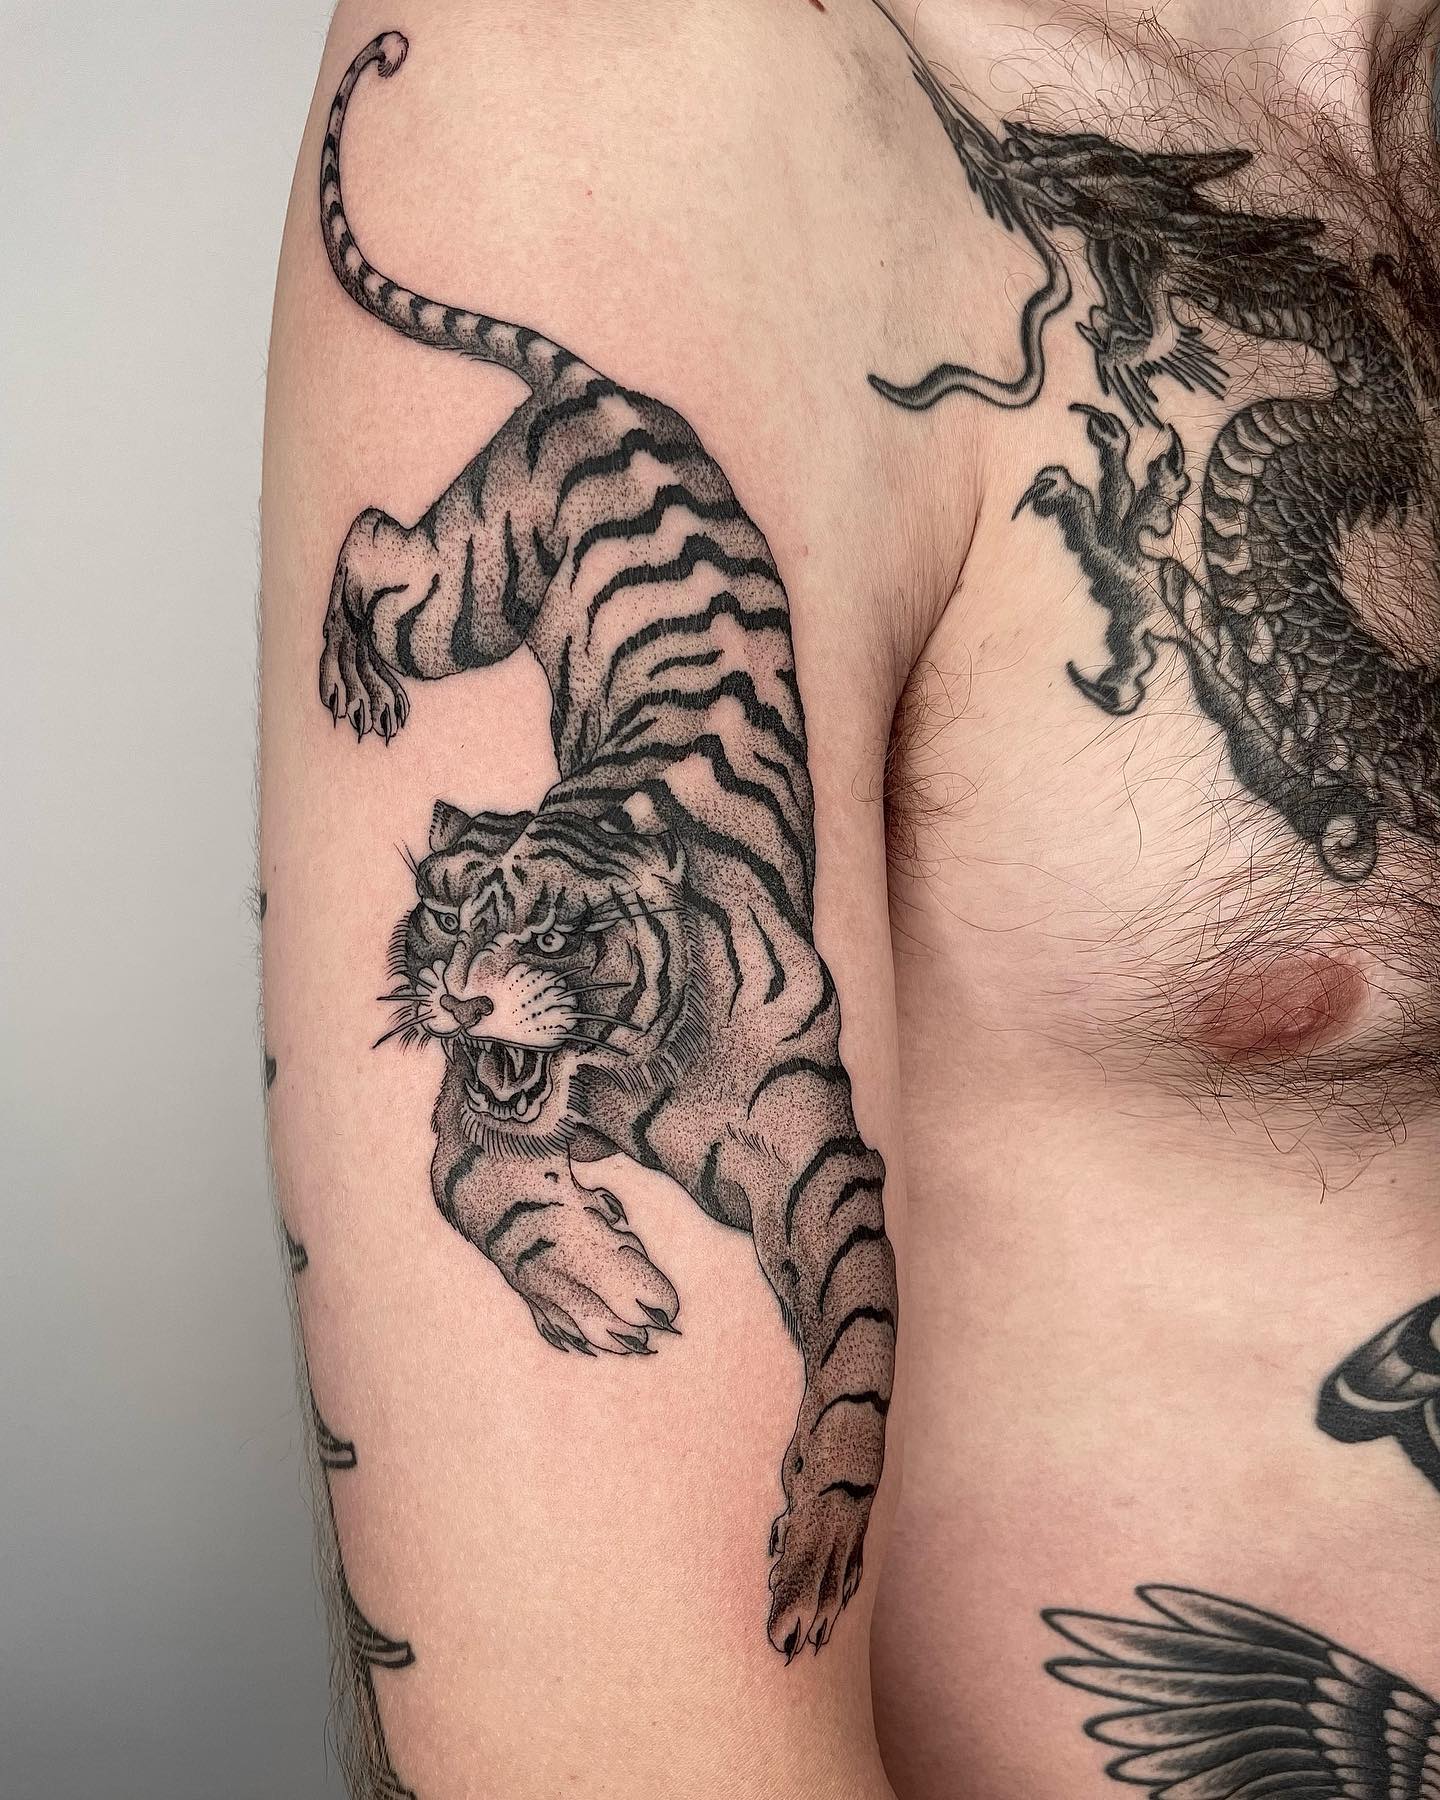 This detailed tiger tattoo has a lot of tiny dots and these make this a realistic tattoo. If you want to show your darker side, go for it.